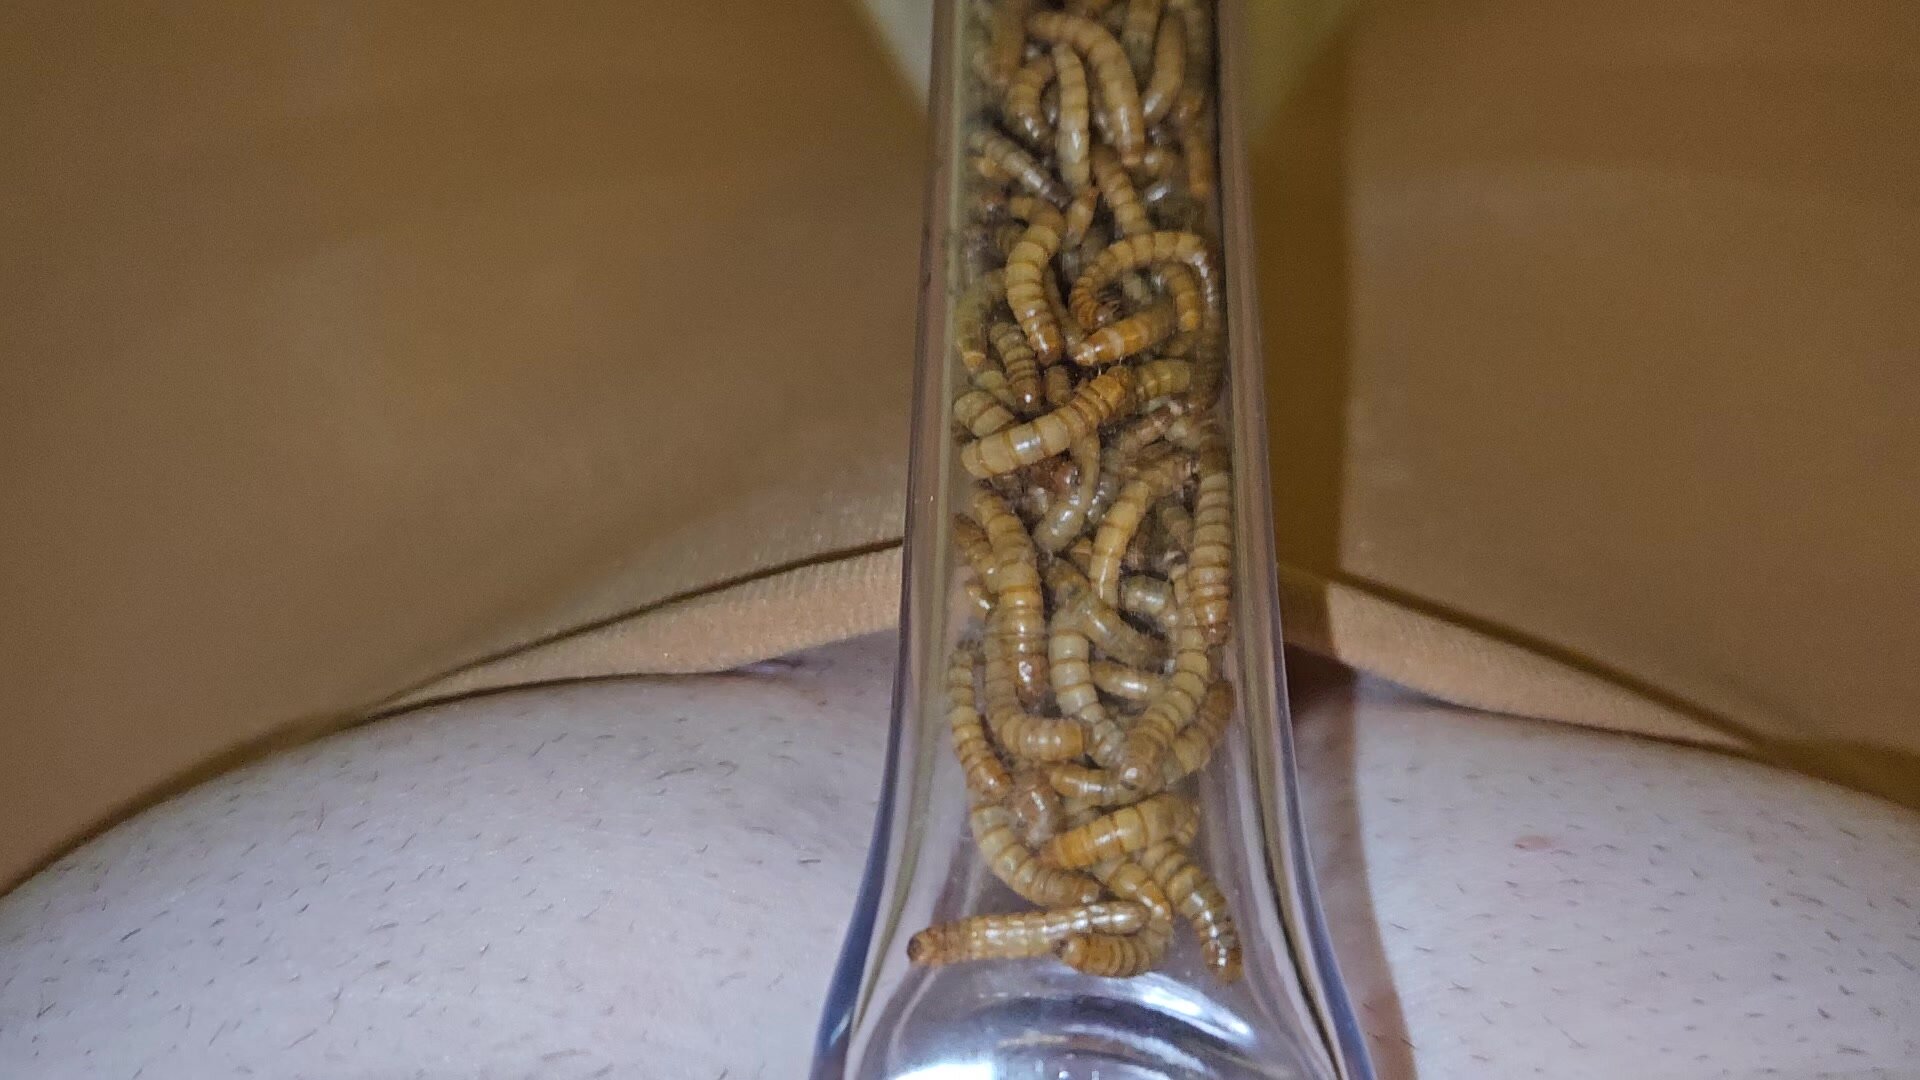 Mealworms fill stockings